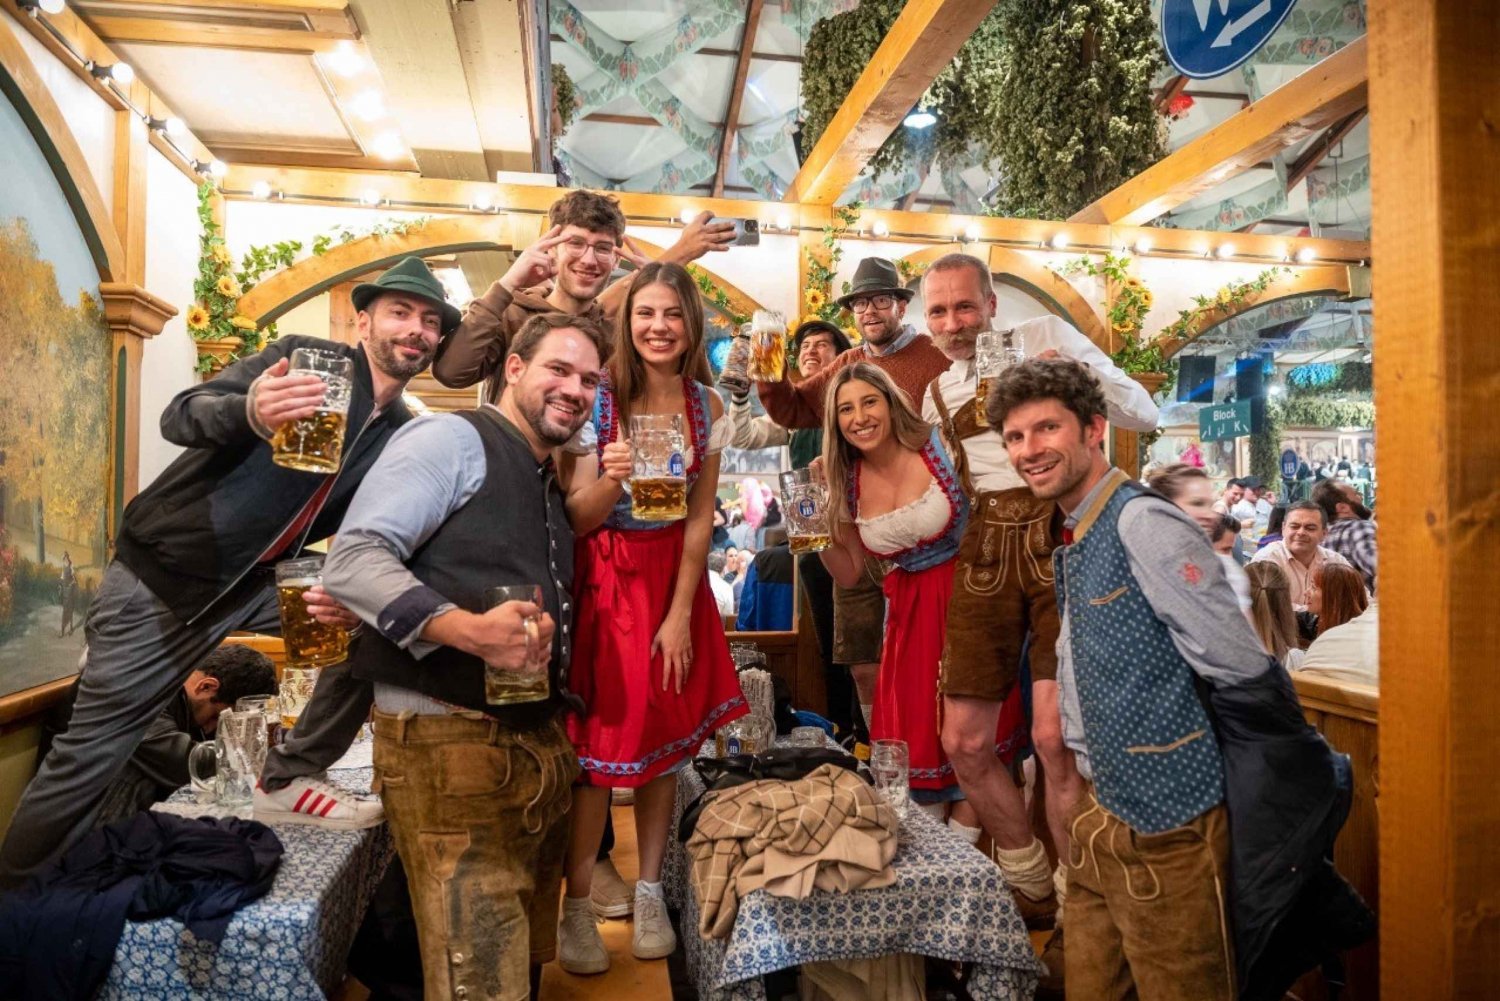 Prost! Party at the Oktoberfest with a local